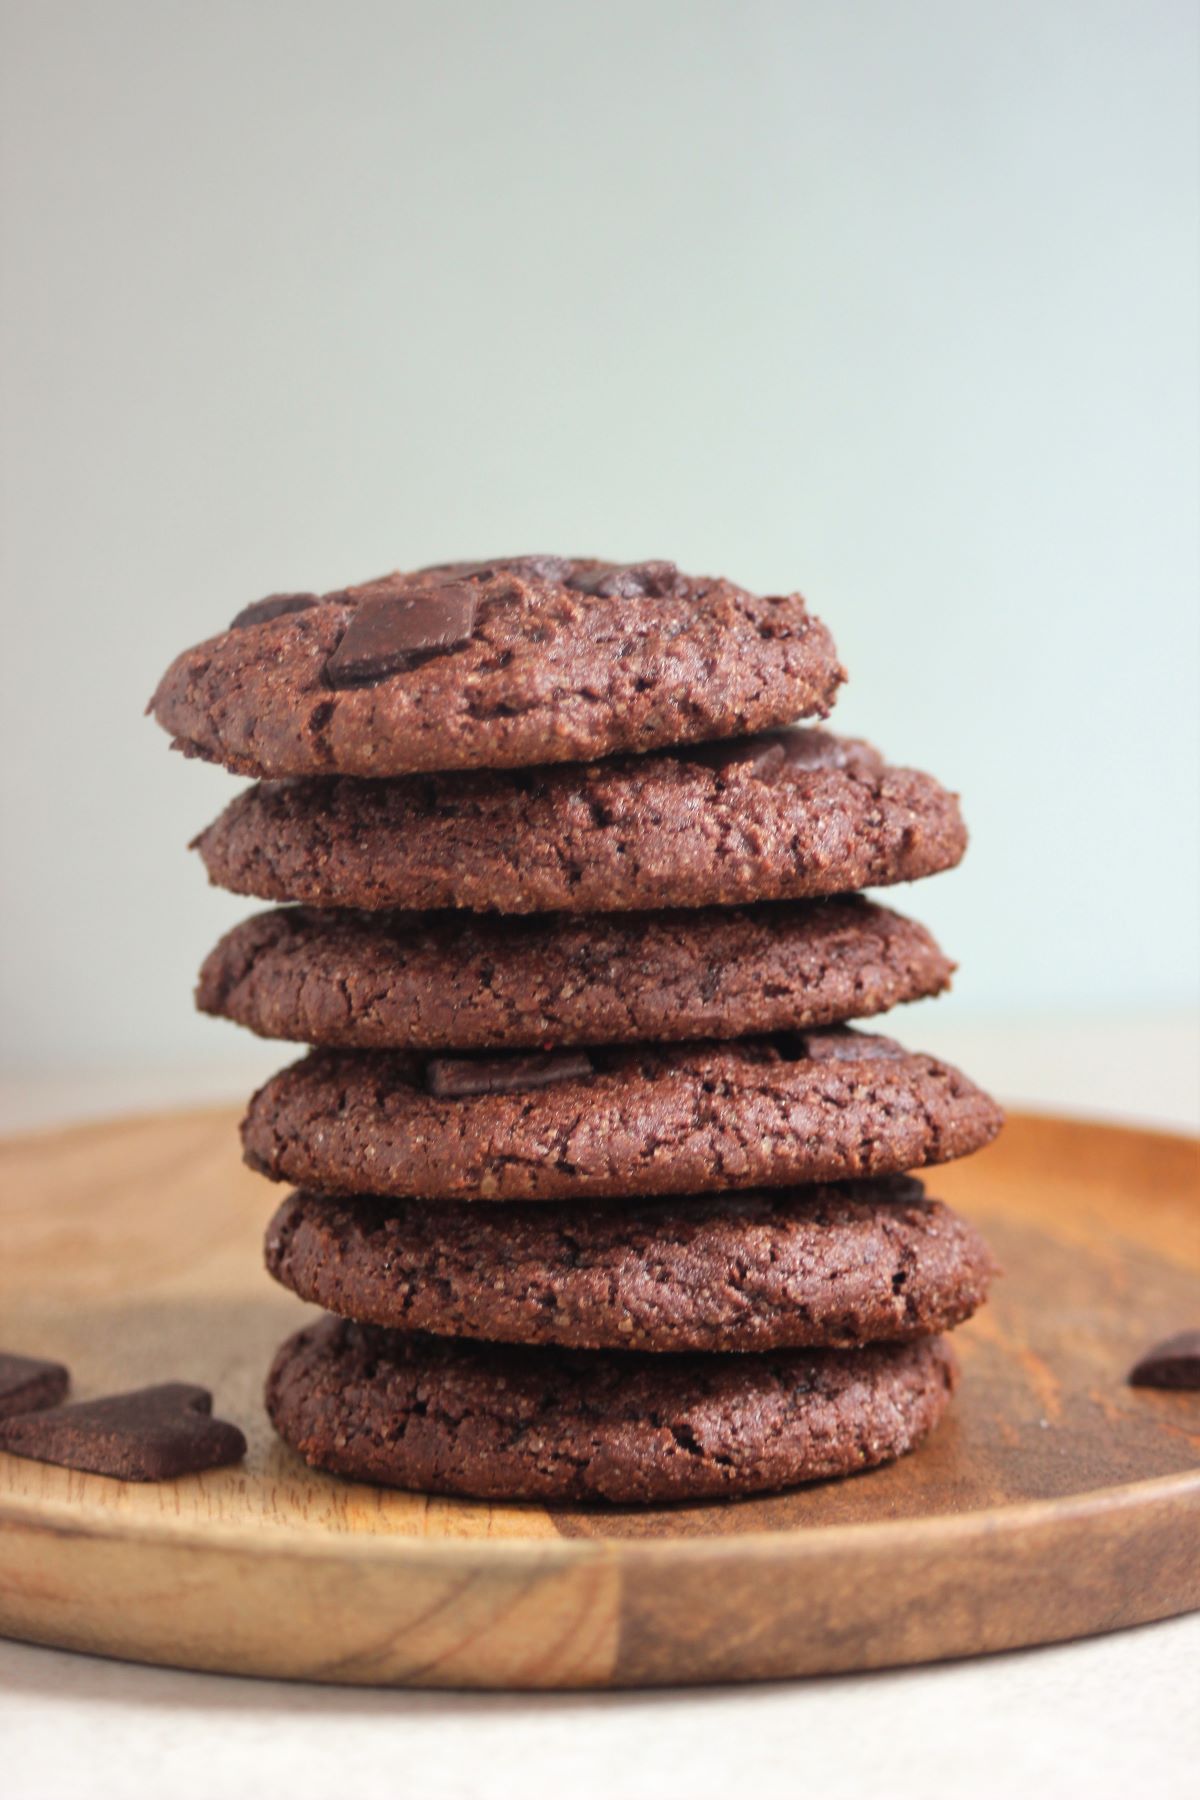 A tower of chocolate cookies on a wooden plate.